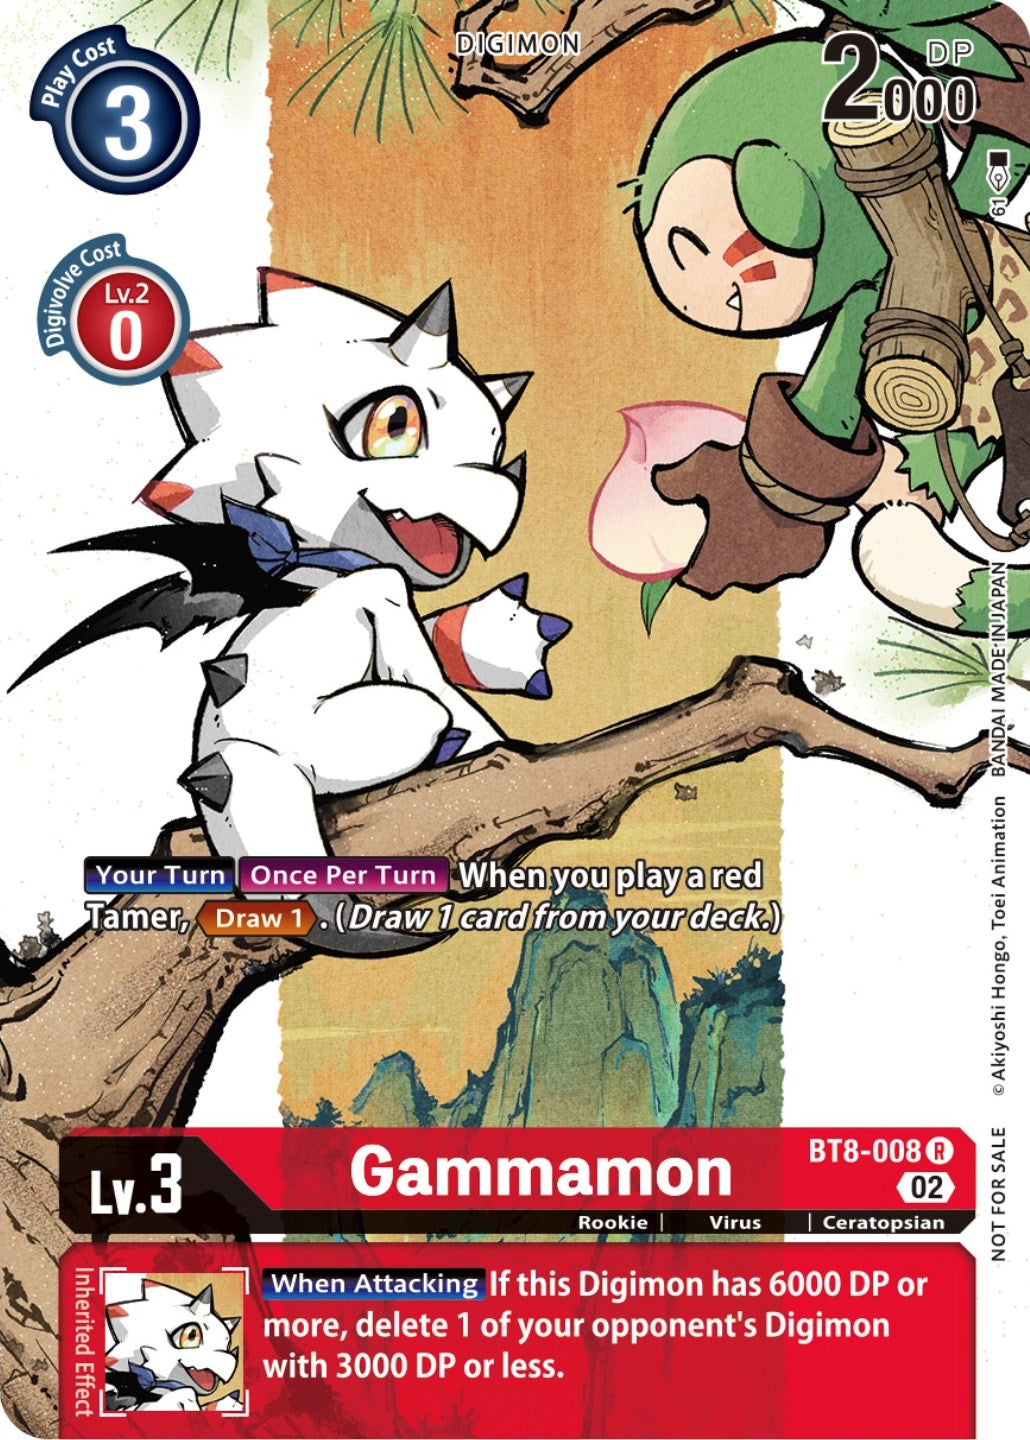 Gammamon [BT8-008] (Digimon Illustration Competition Promotion Pack) [New Awakening Promos] | The Time Vault CA